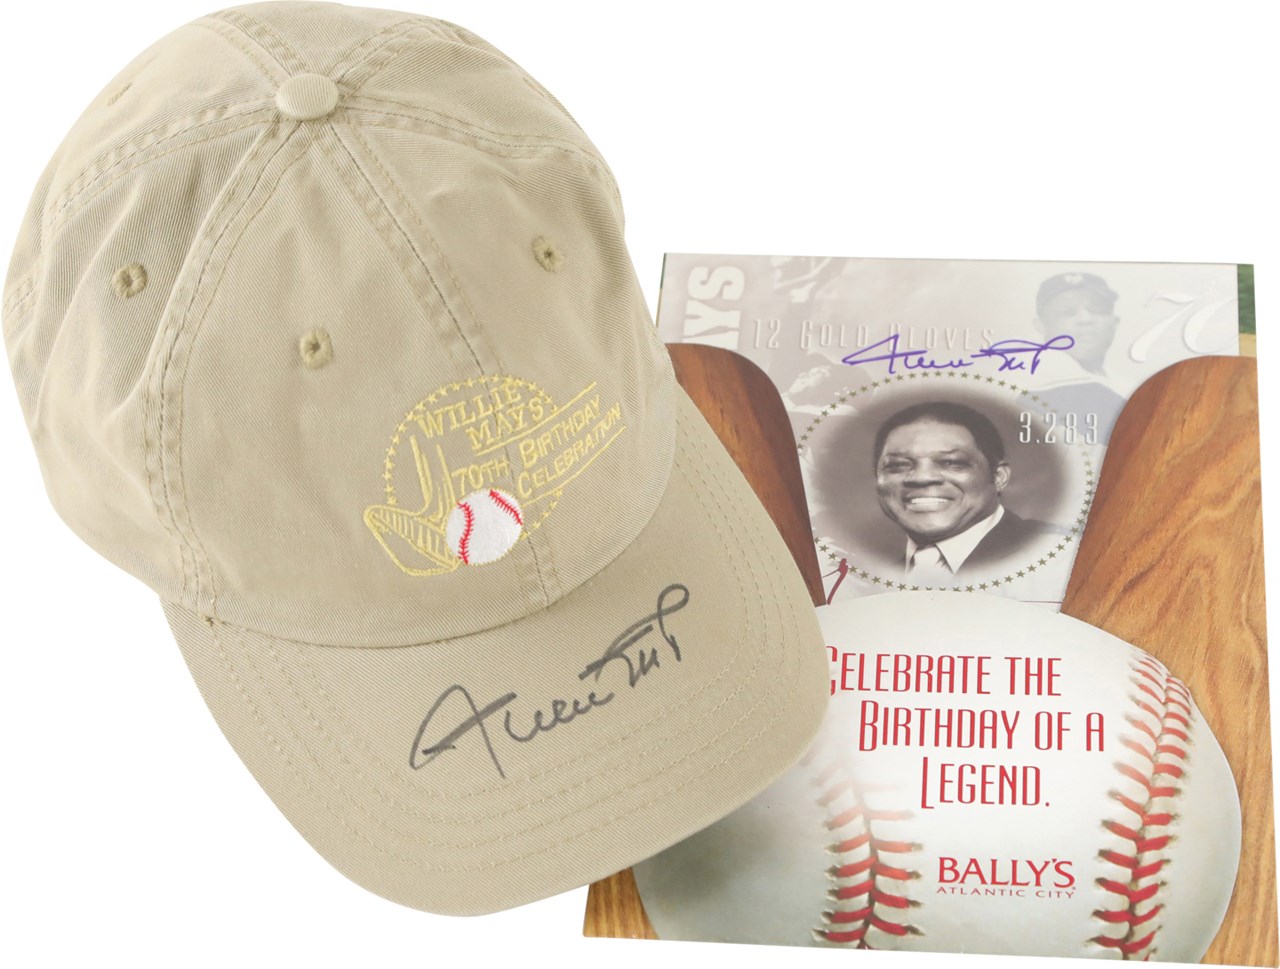 - 2001 Willie Mays 70th Birthday Party Signed Invitation and Hat